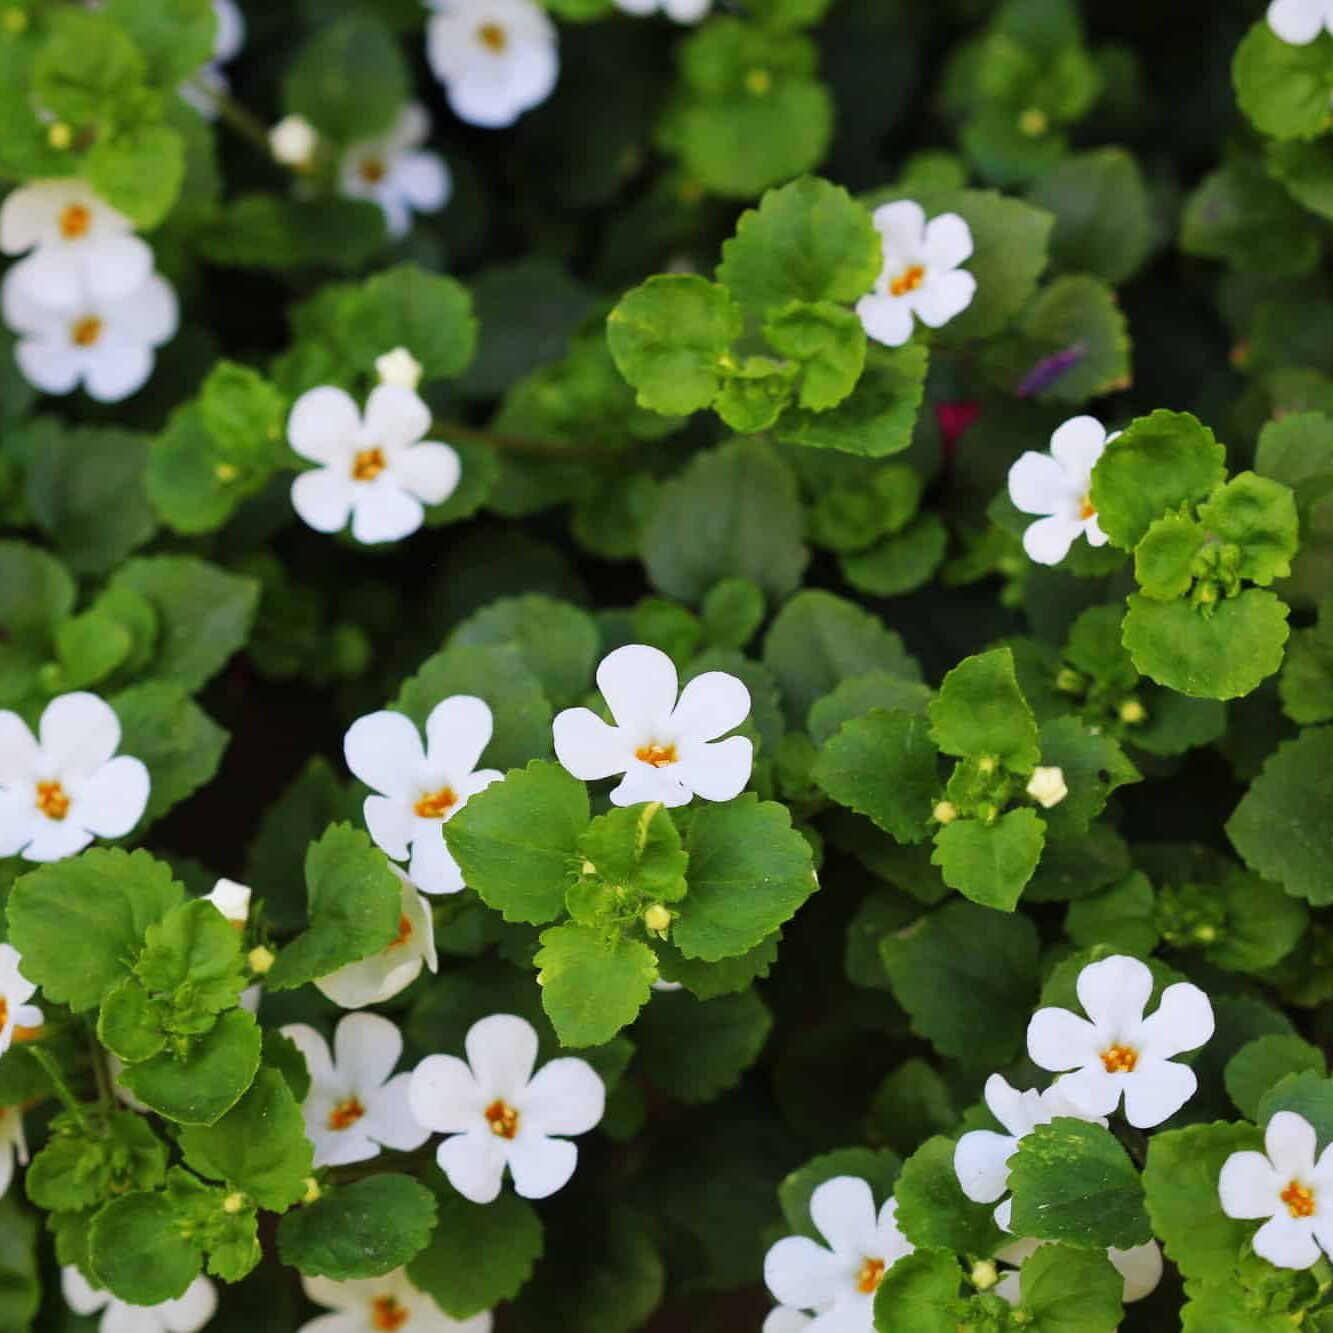 Bacopa monnieri, herb Bacopa is a medicinal herb used in Ayurveda, also known as "Brahmi", a herbal memory